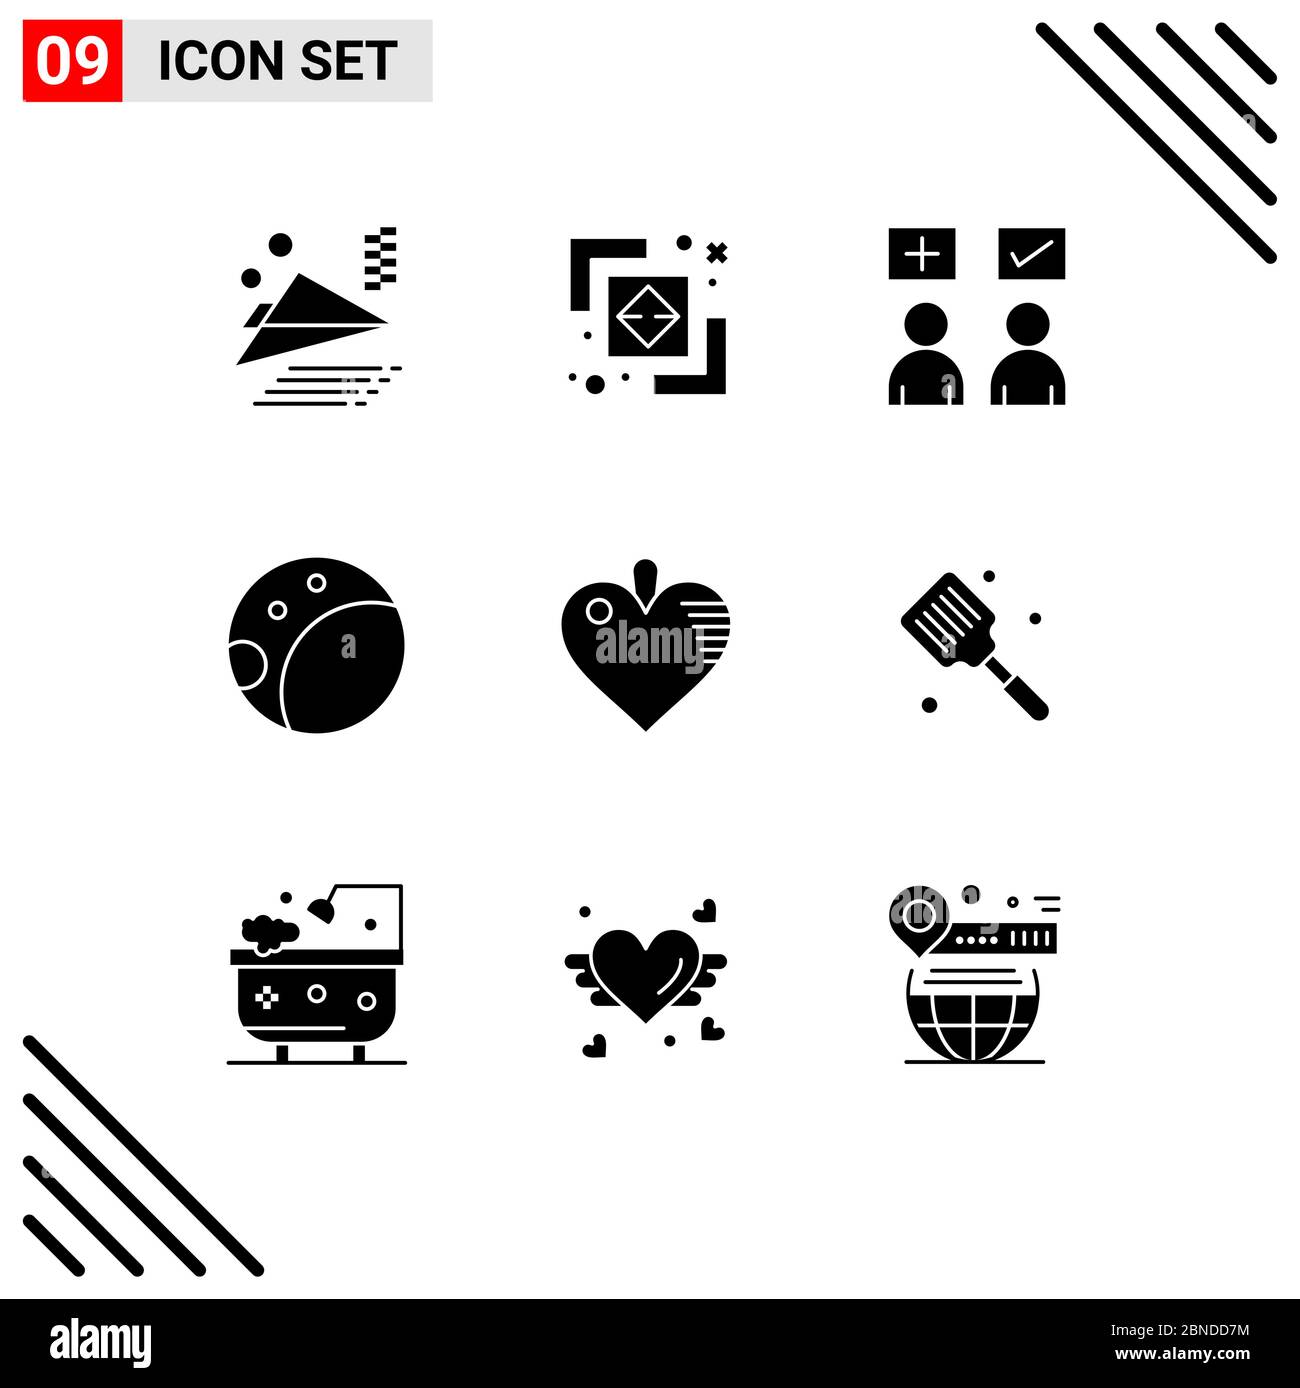 Group of 9 Solid Glyphs Signs and Symbols for baked, heart, education, healthcare, backside Editable Vector Design Elements Stock Vector